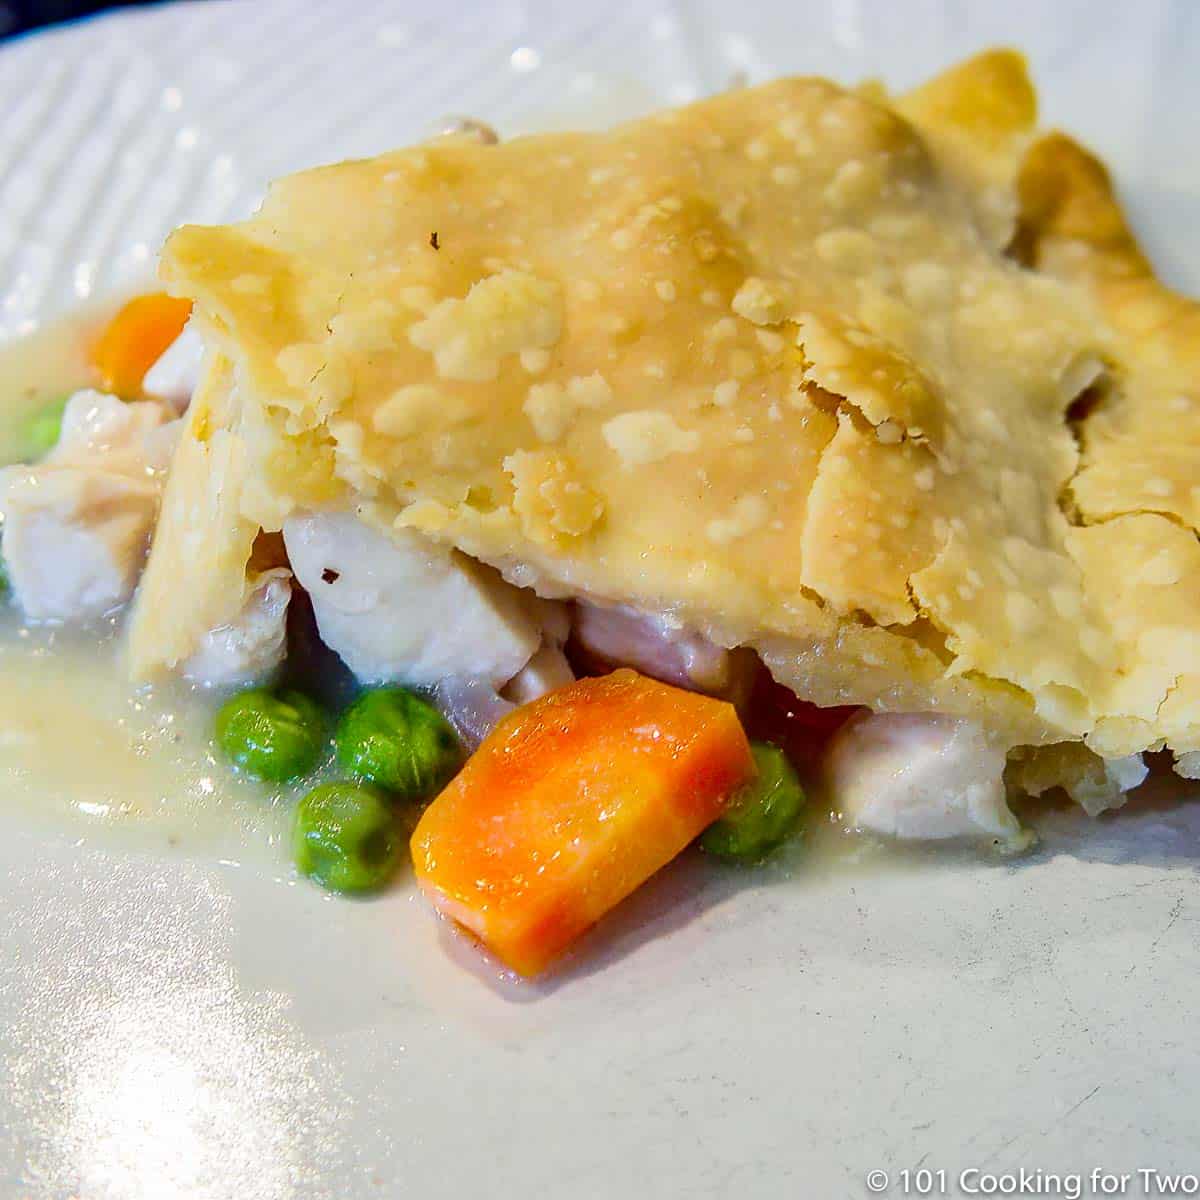 https://www.101cookingfortwo.com/wp-content/uploads/2022/04/chicken-pot-pie-on-white-plate.jpg